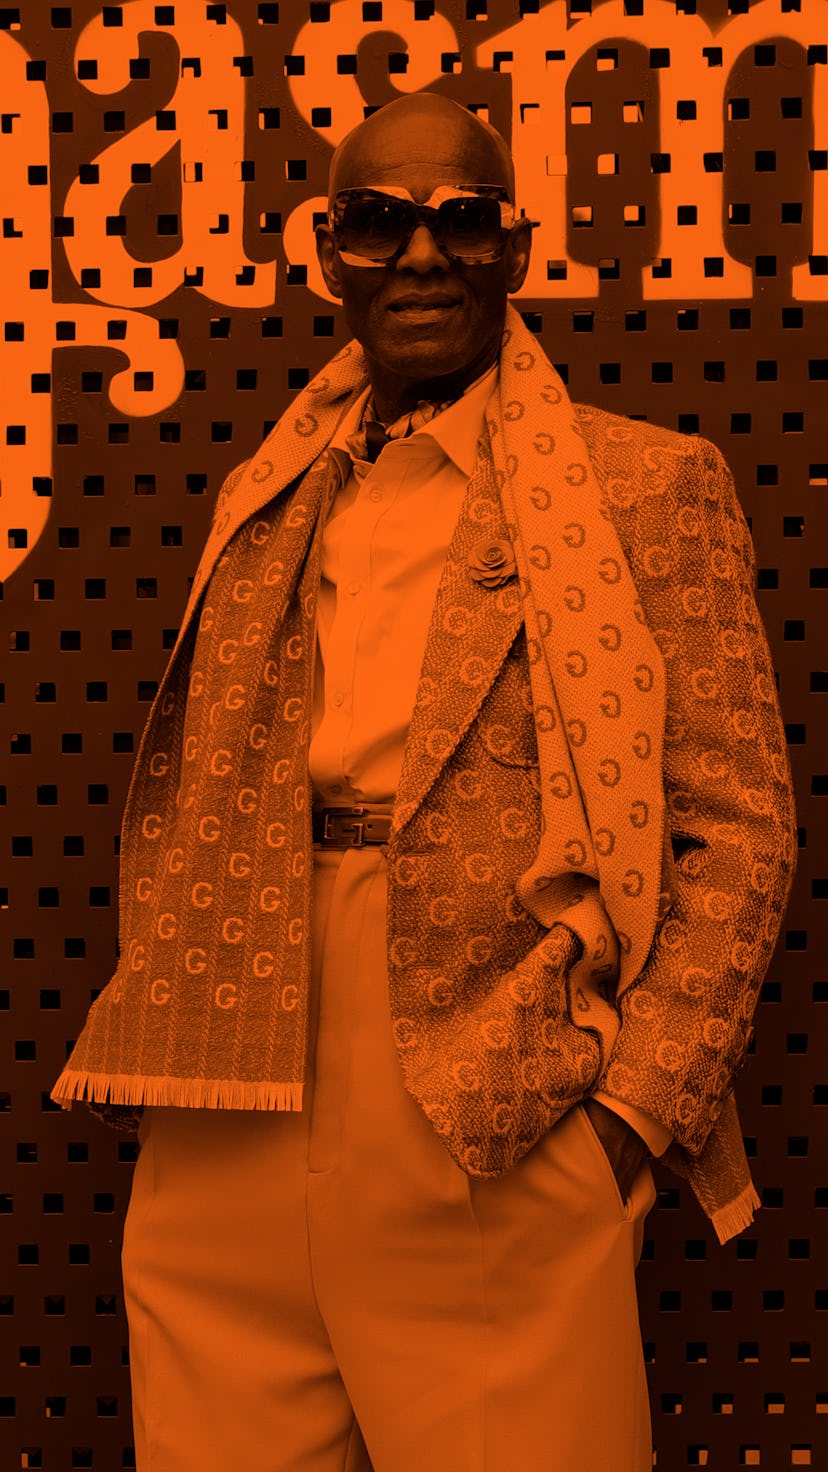 Dapper Dan at an event in a beige suit and a scarf